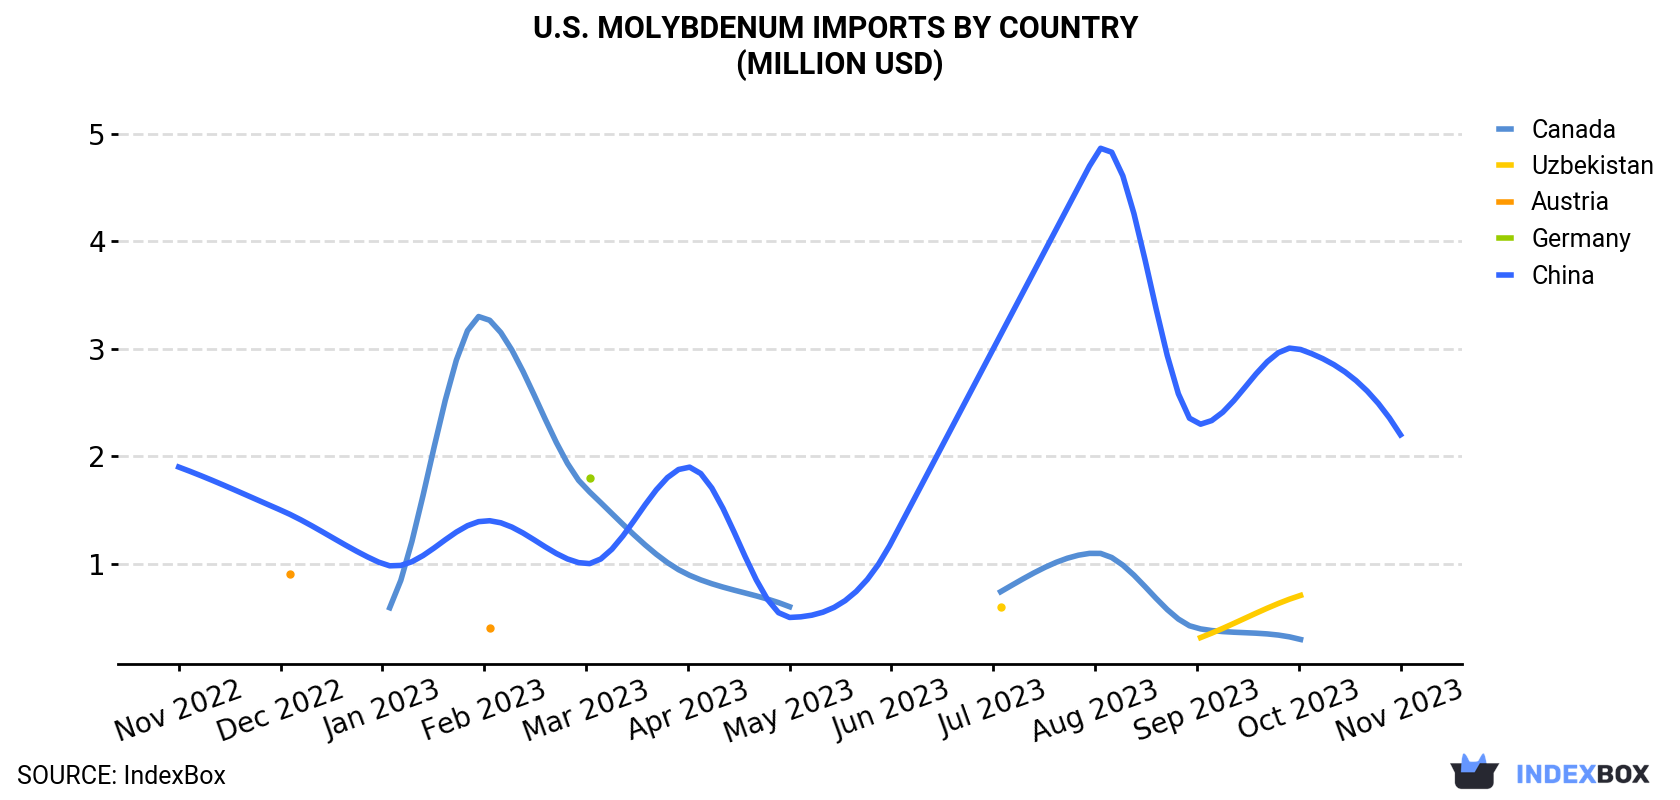 U.S. Molybdenum Imports By Country (Million USD)